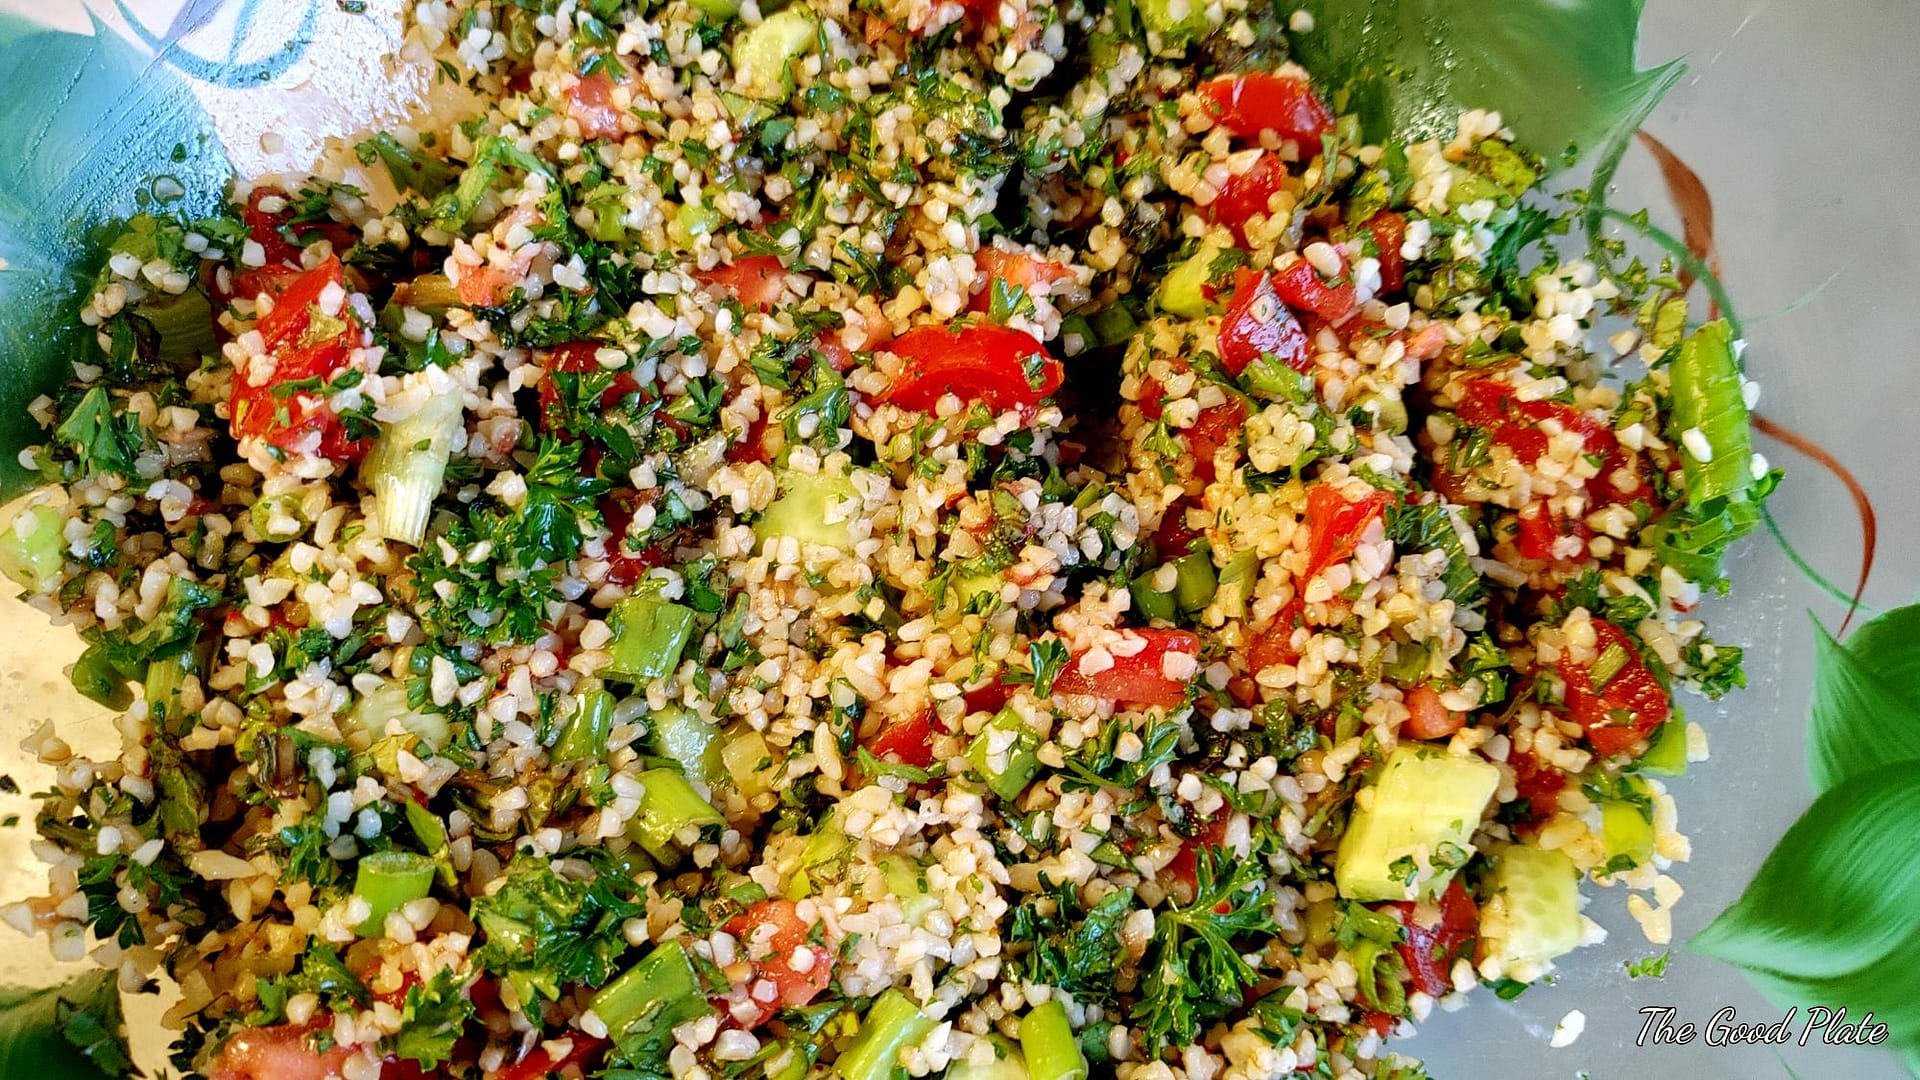 Tabbouleh - Bright Salad for Spring and Summer - The Good Plate